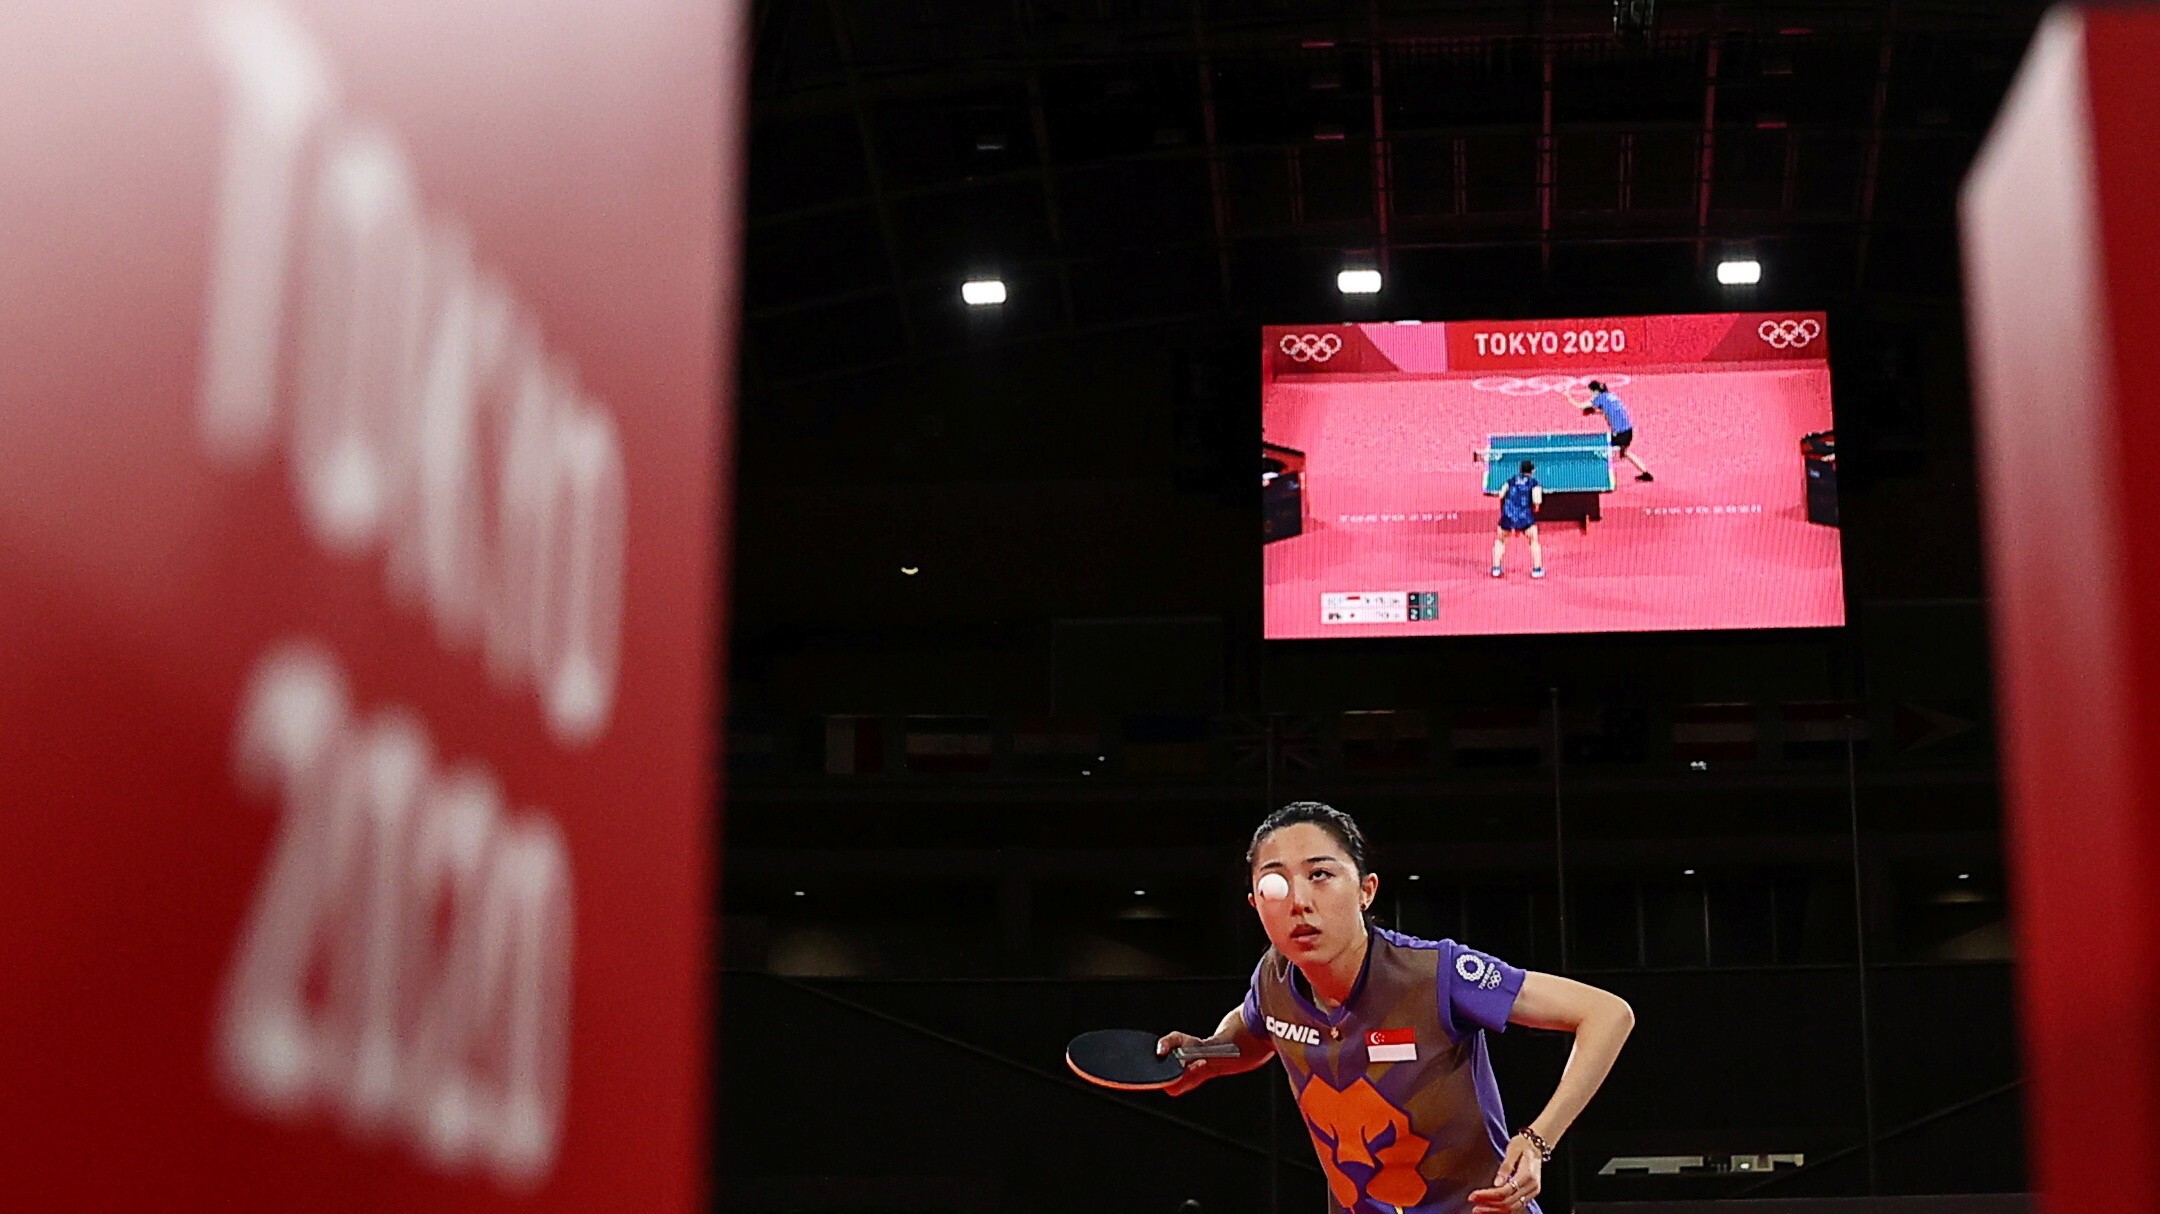 Singapore’s best medal hopes could now rest on the shoulders of Yu Mengyu and her table tennis teammates. Photo: Reuters